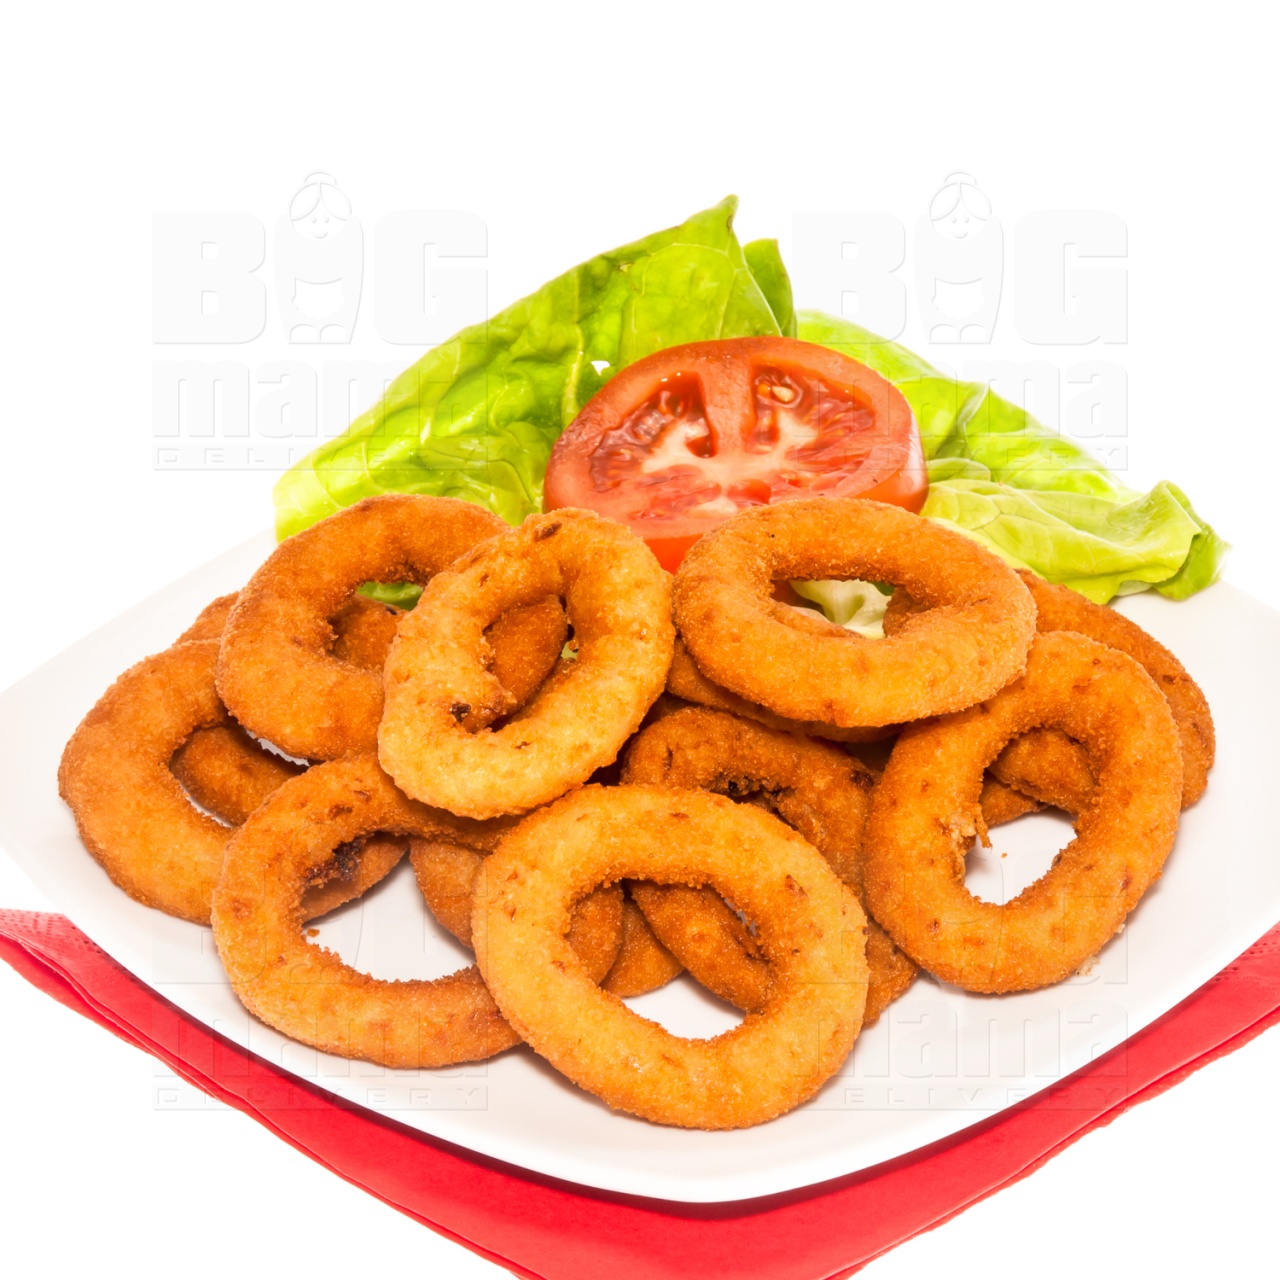 Product #139 image - Onion rings